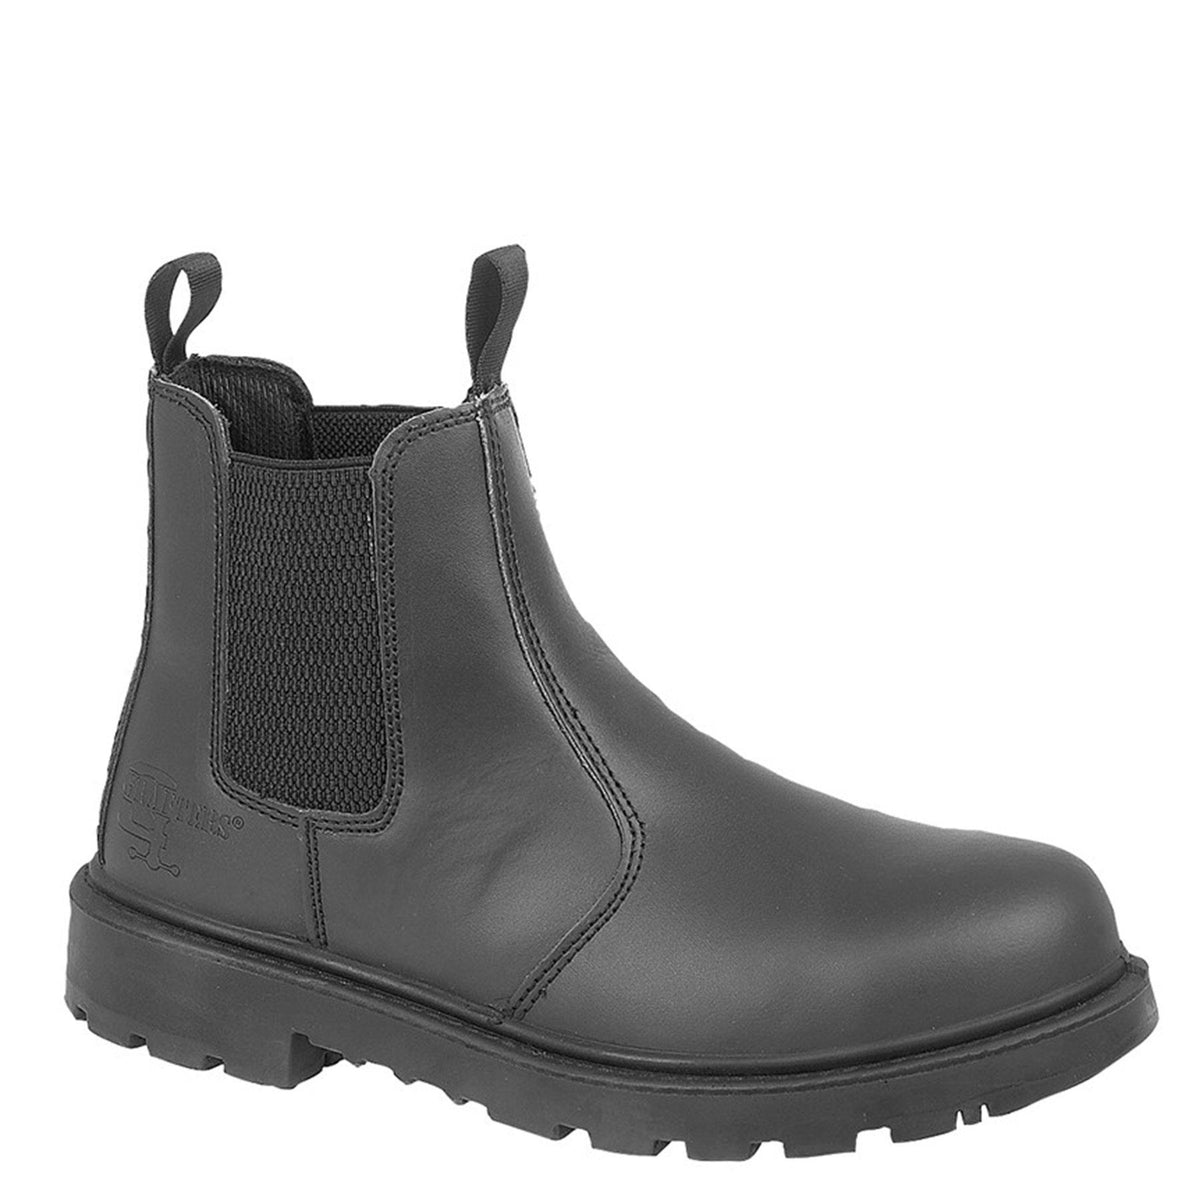 Grafters Grinder S1P SRC Safety Steel Toecap Chelsea Boots